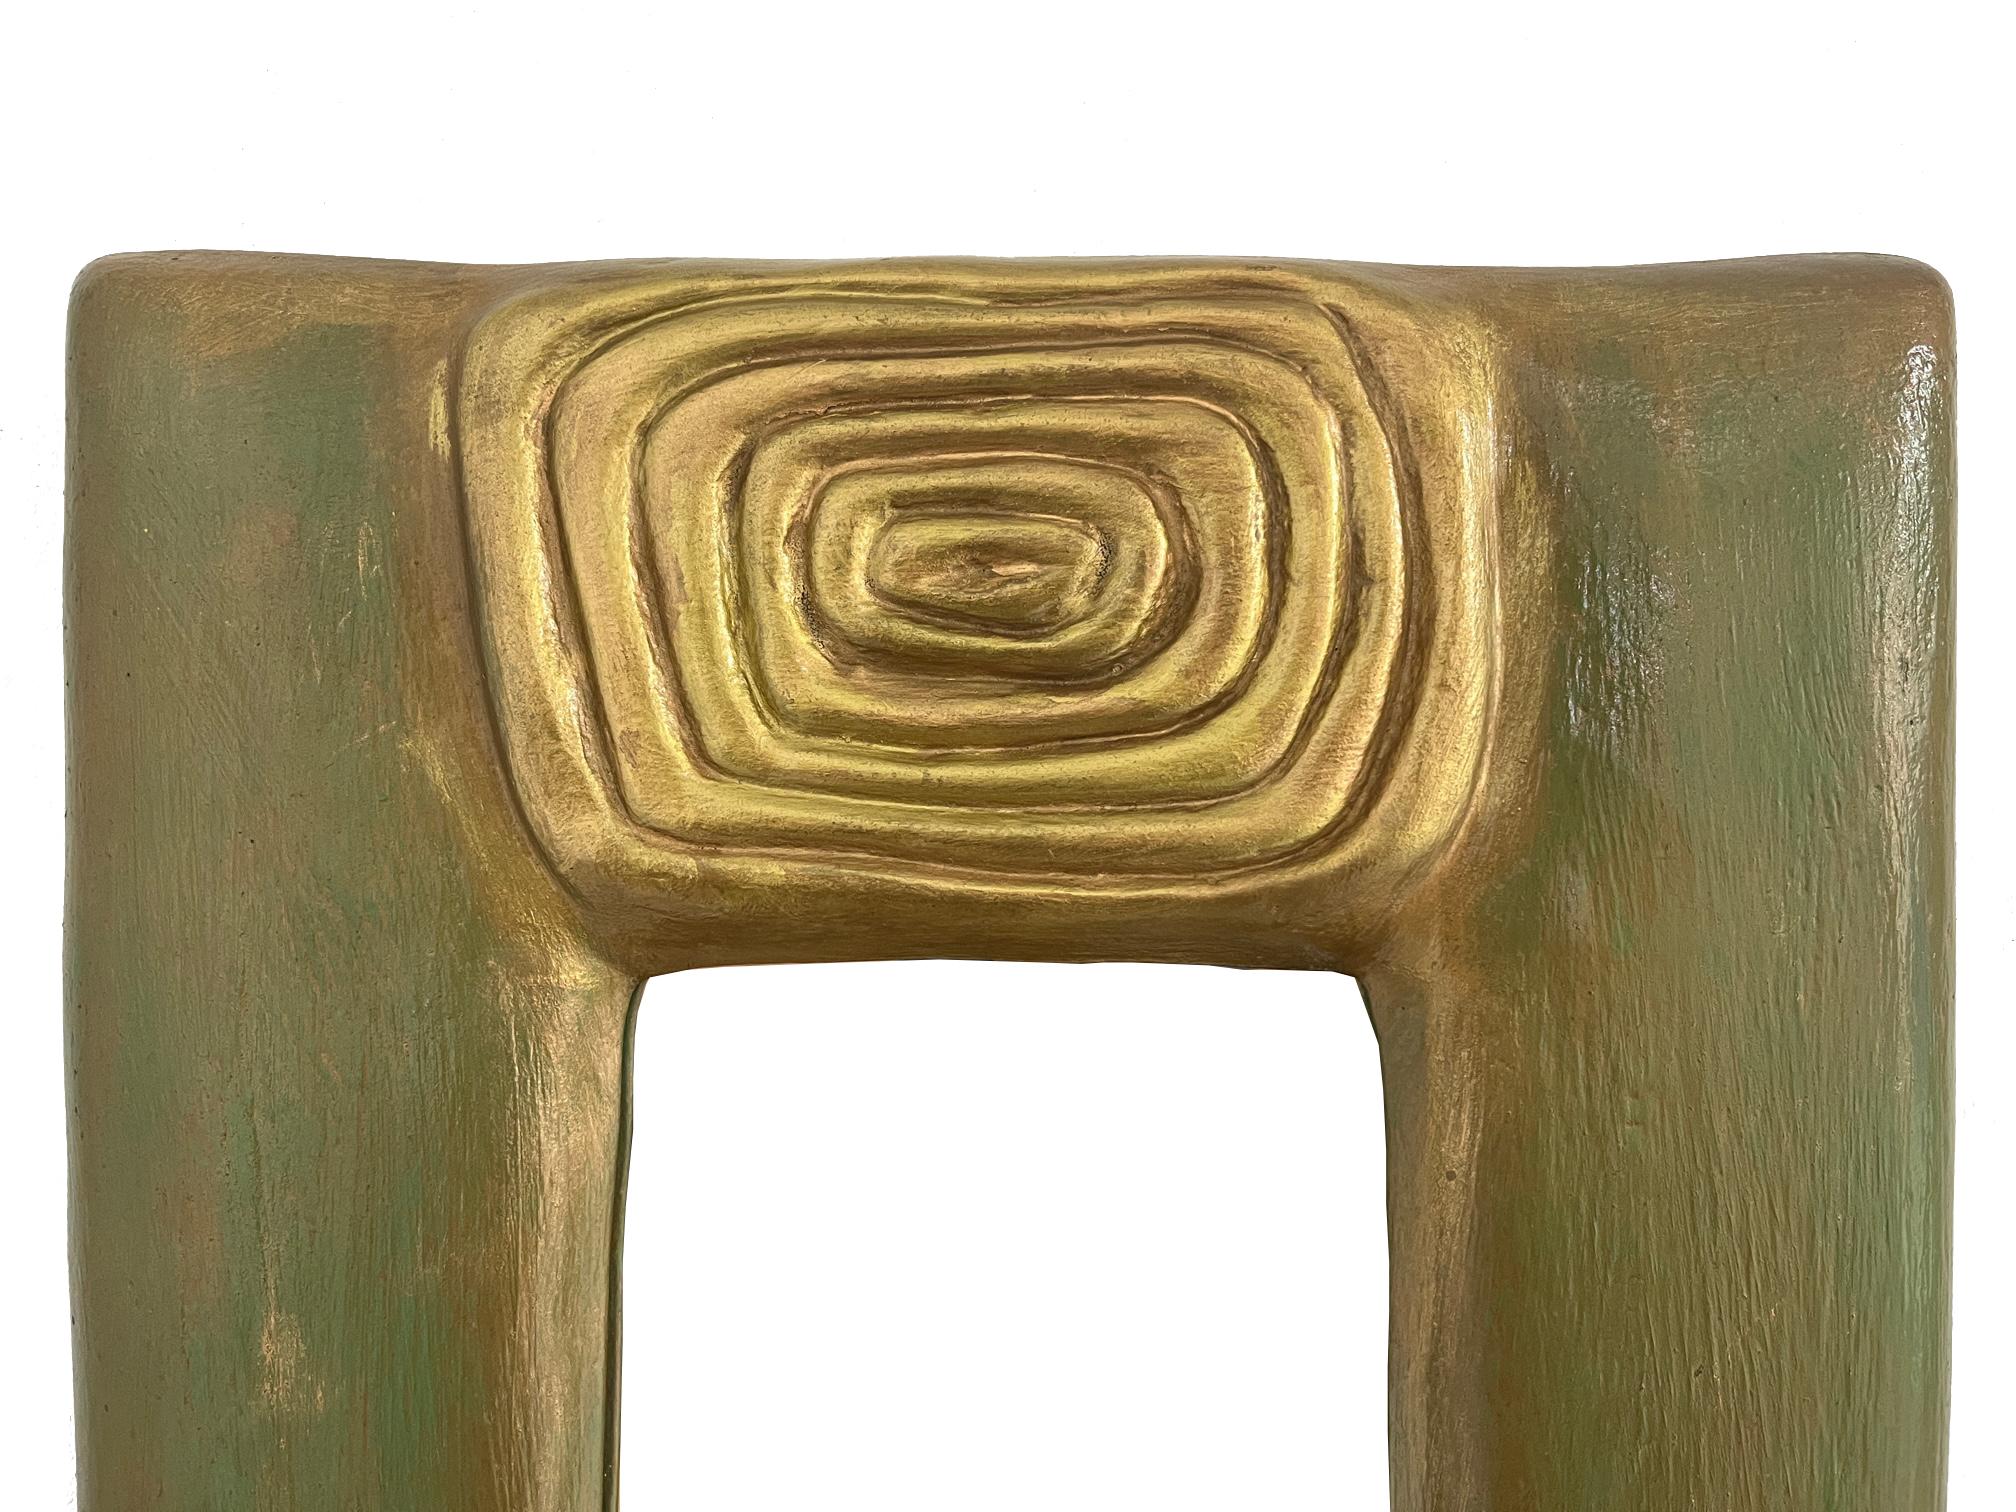 French Green and Gold Ceramic Mirror by Alice Colonieu, Mid-20th Century

The mirrored part is not original and not signed but you can see on the last picture of Alice colonieu with the mirror in her hands.

Alice Colonieu was a French ceramist,